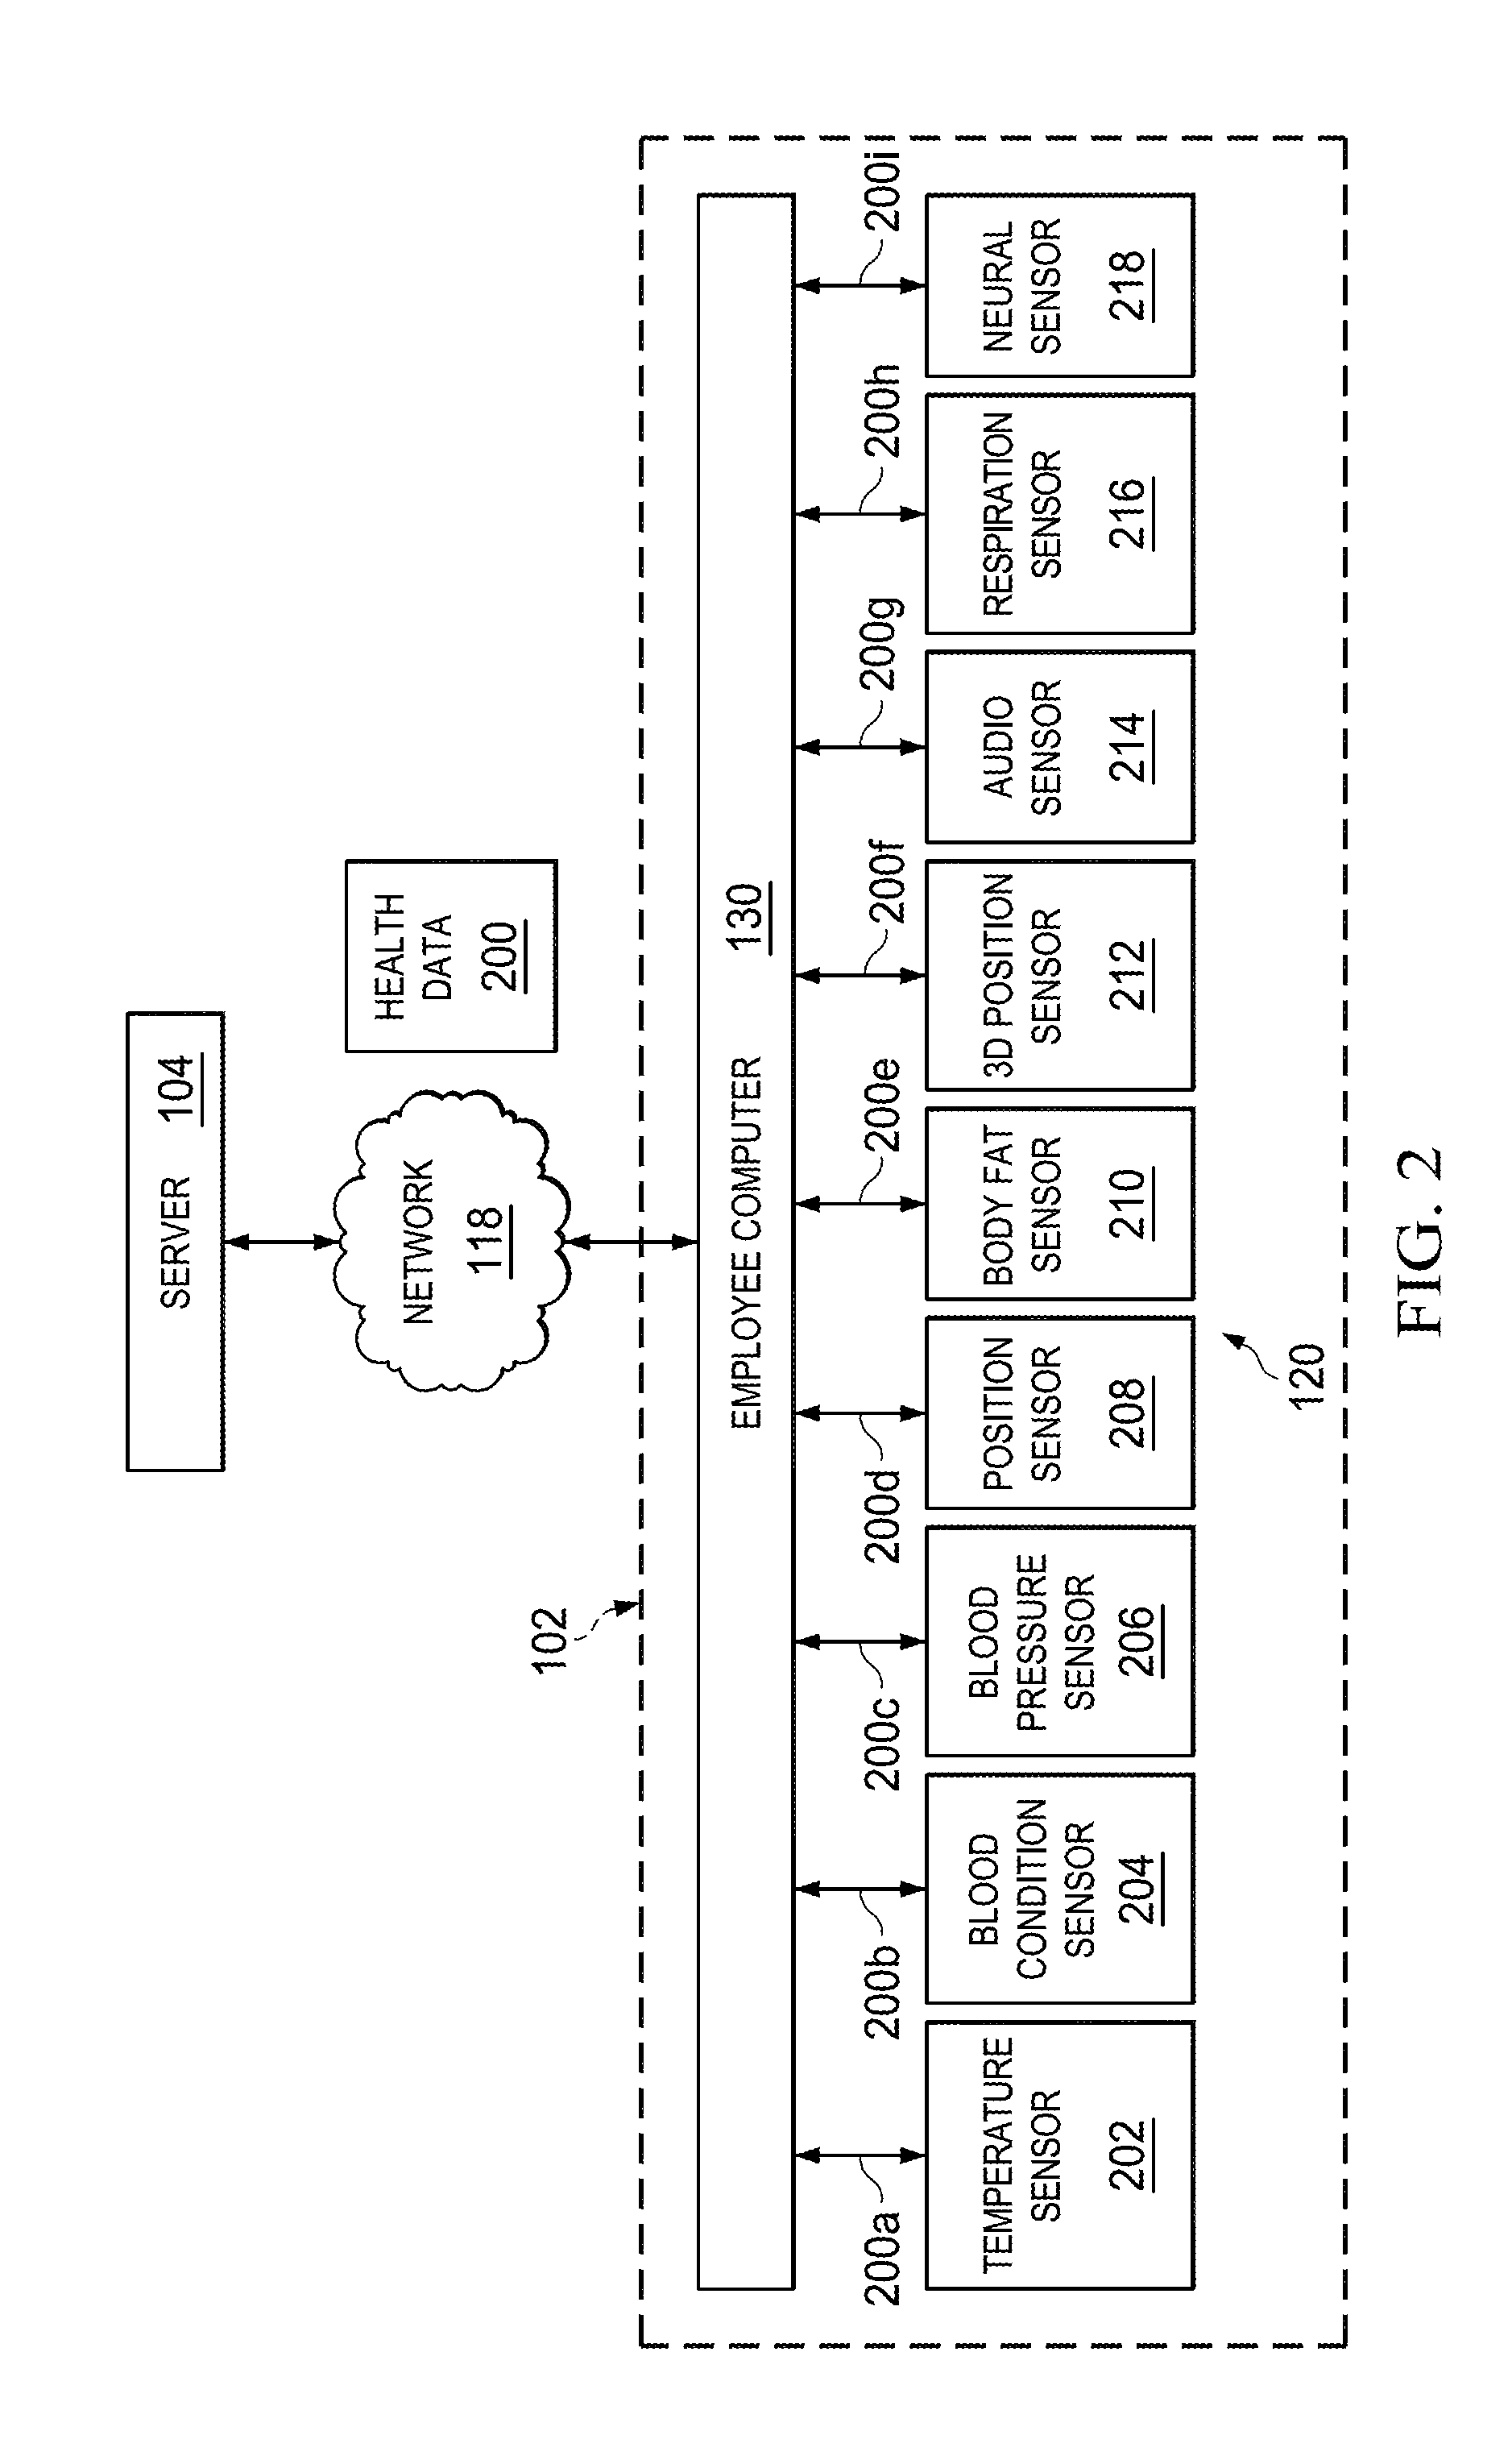 Floor mat system and associated, computer medium and computer-implemented methods for monitoring and improving health and productivity of employees